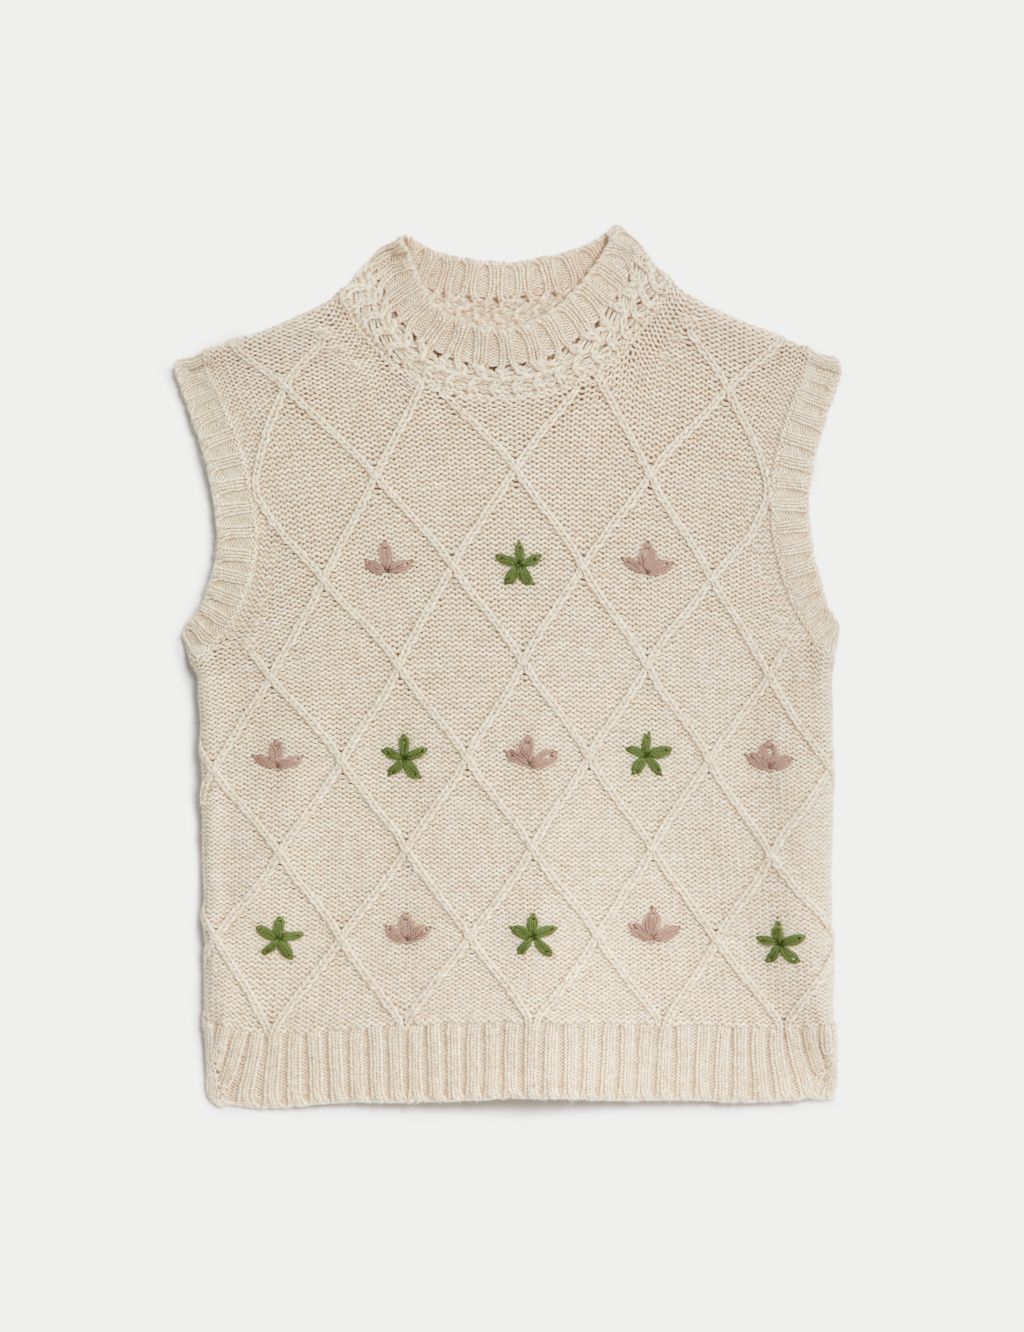 Cotton Blend Embroidered Knitted Vest image 2